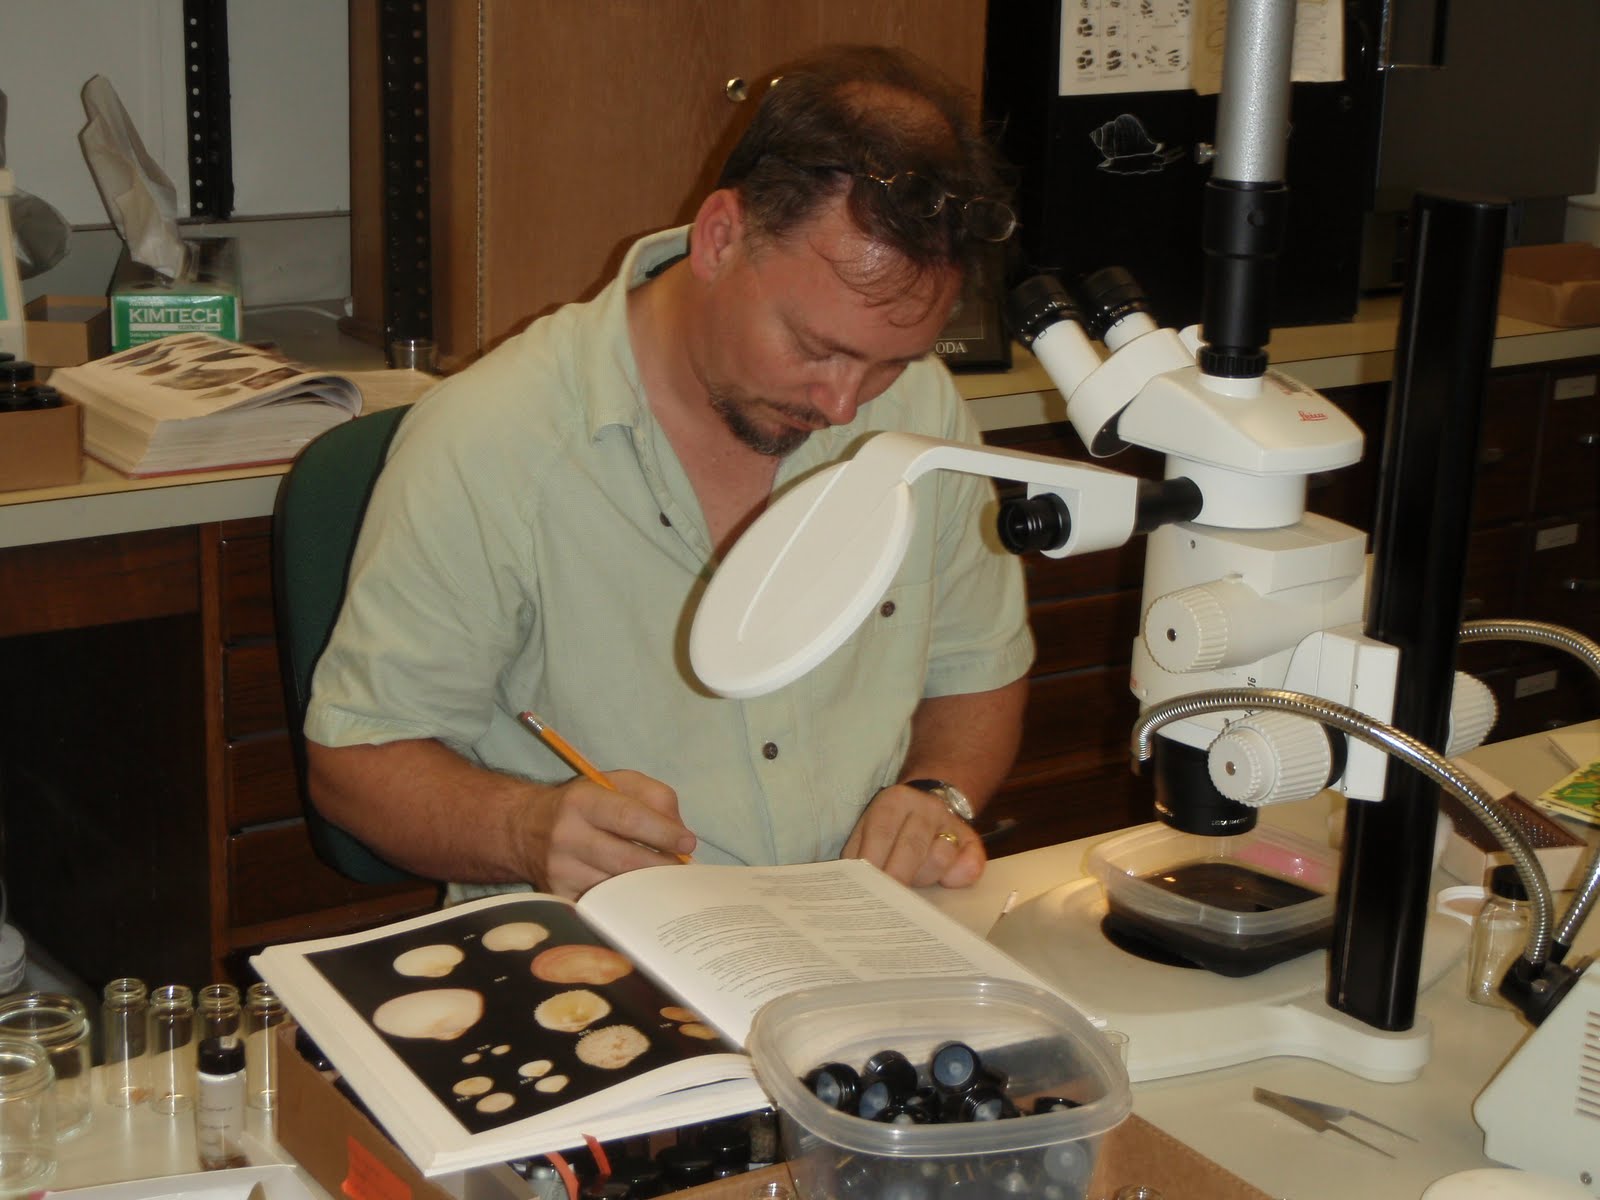 John using a book to identify bivalves